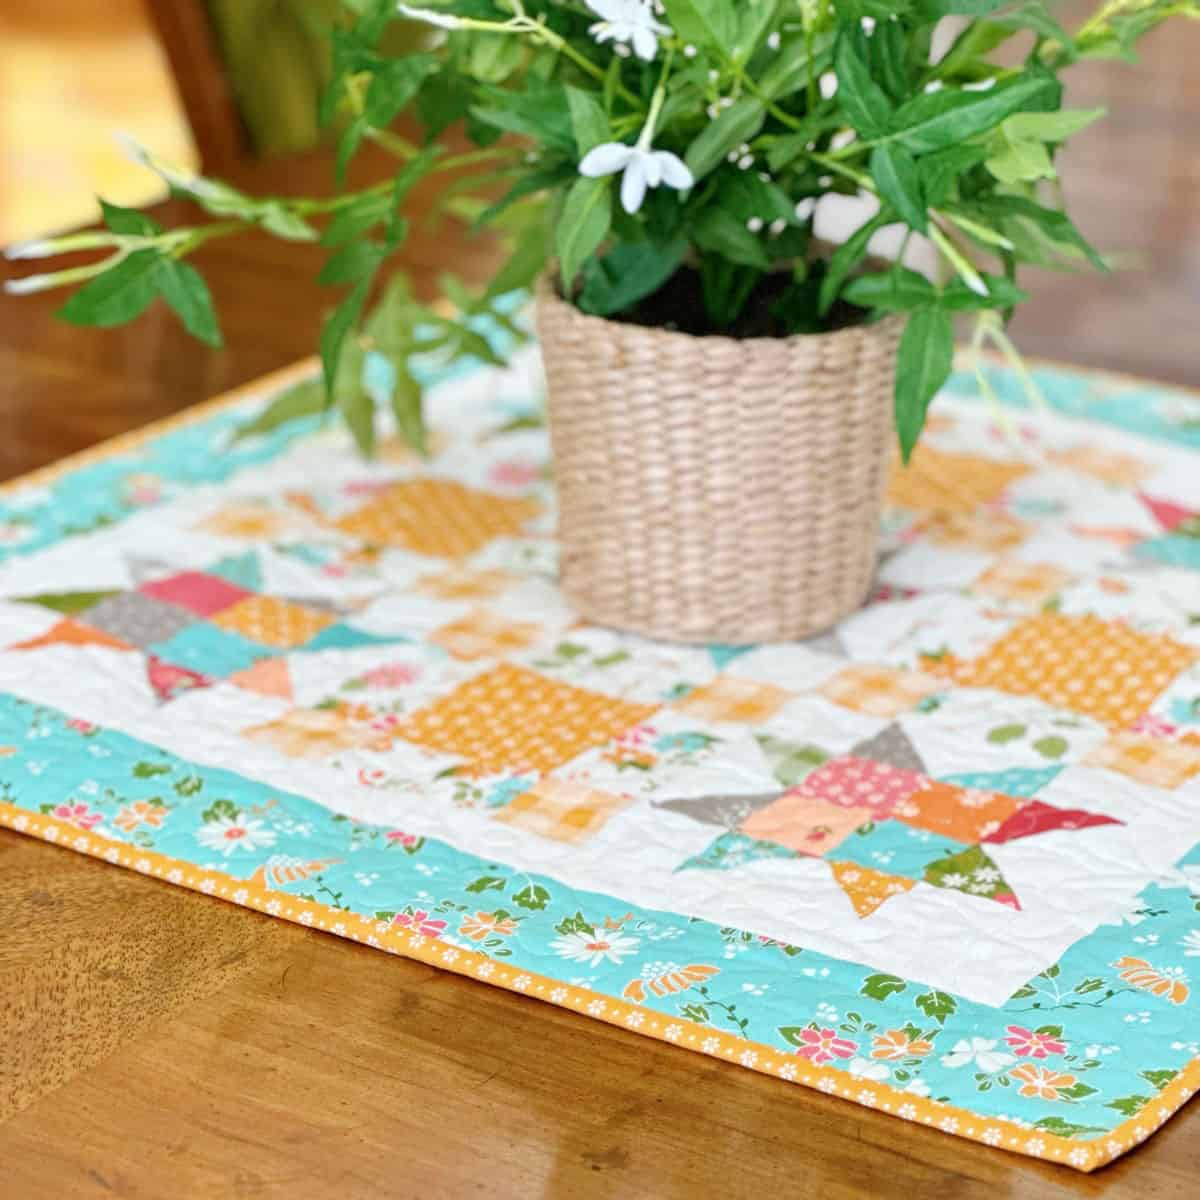 Quilted patchwork table topper in bright fall colors with potted plant on top.